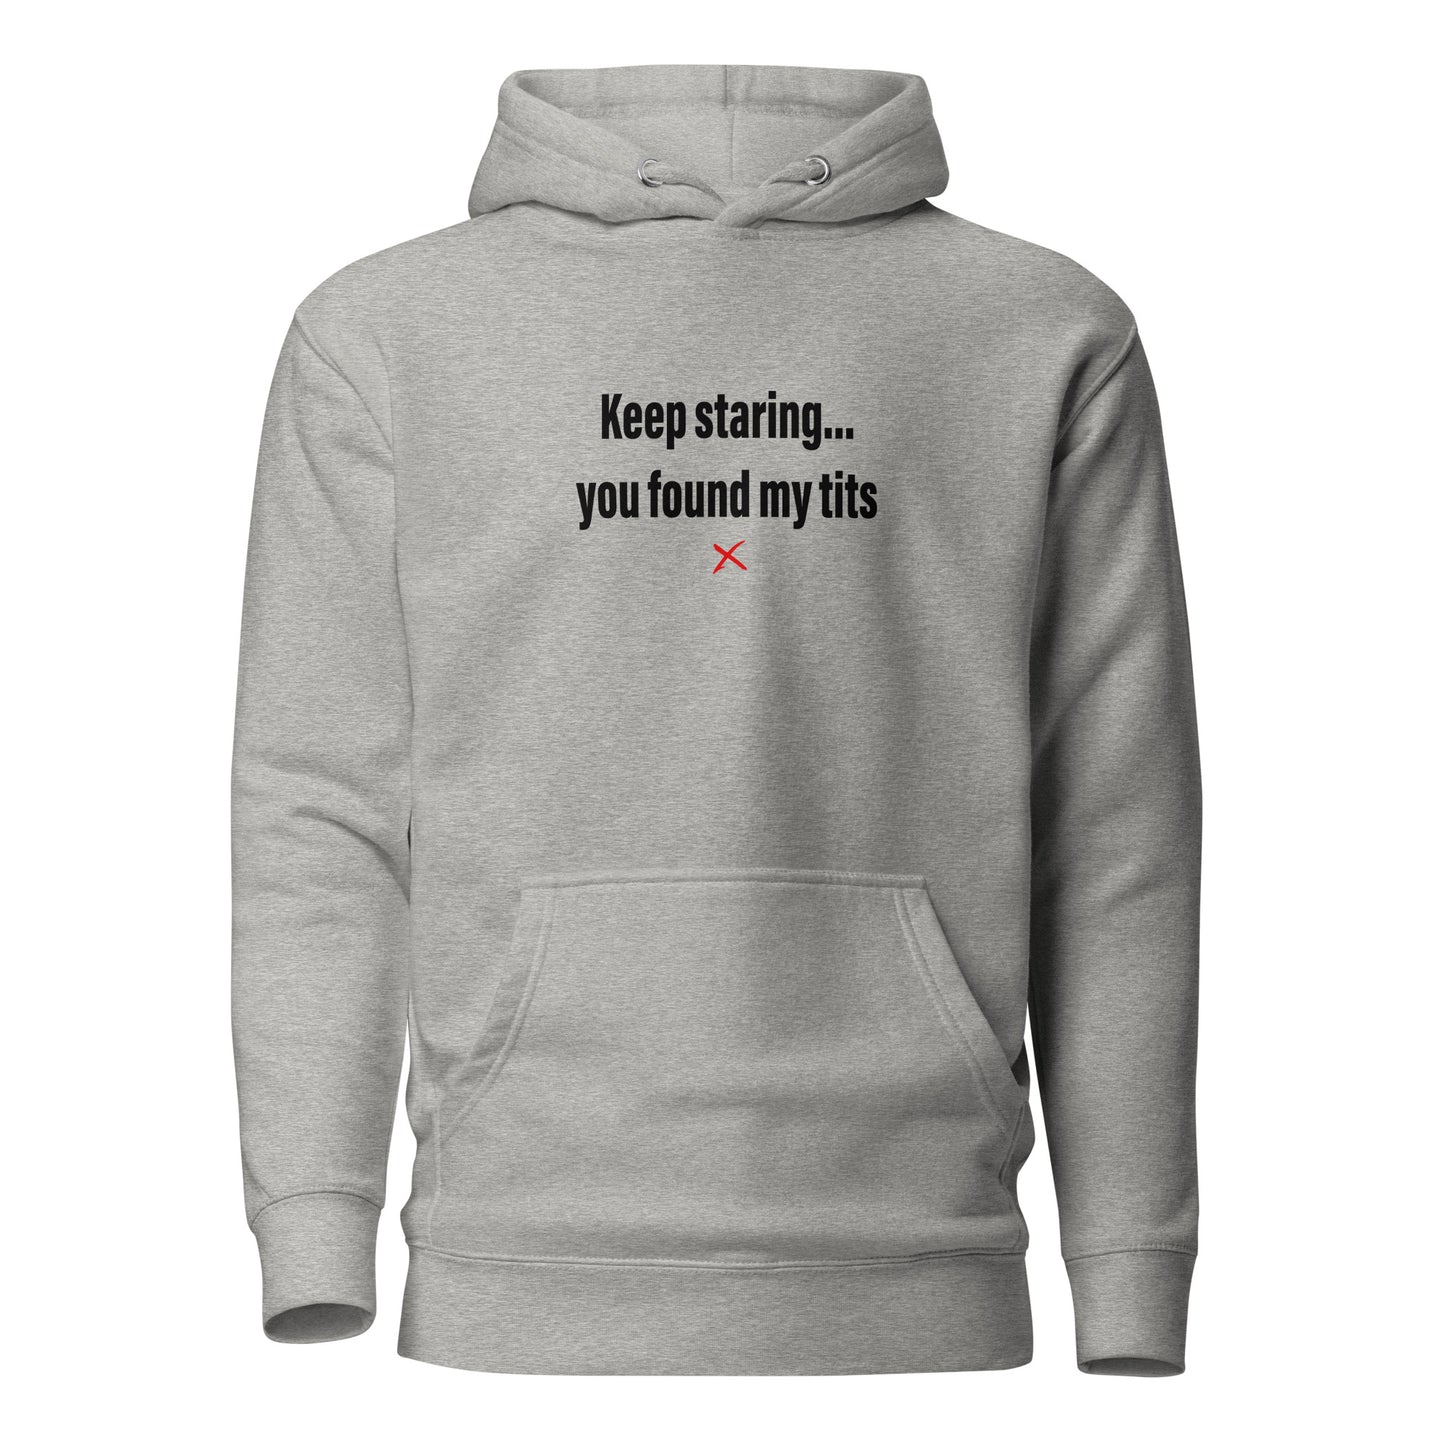 Keep staring... you found my tits - Hoodie